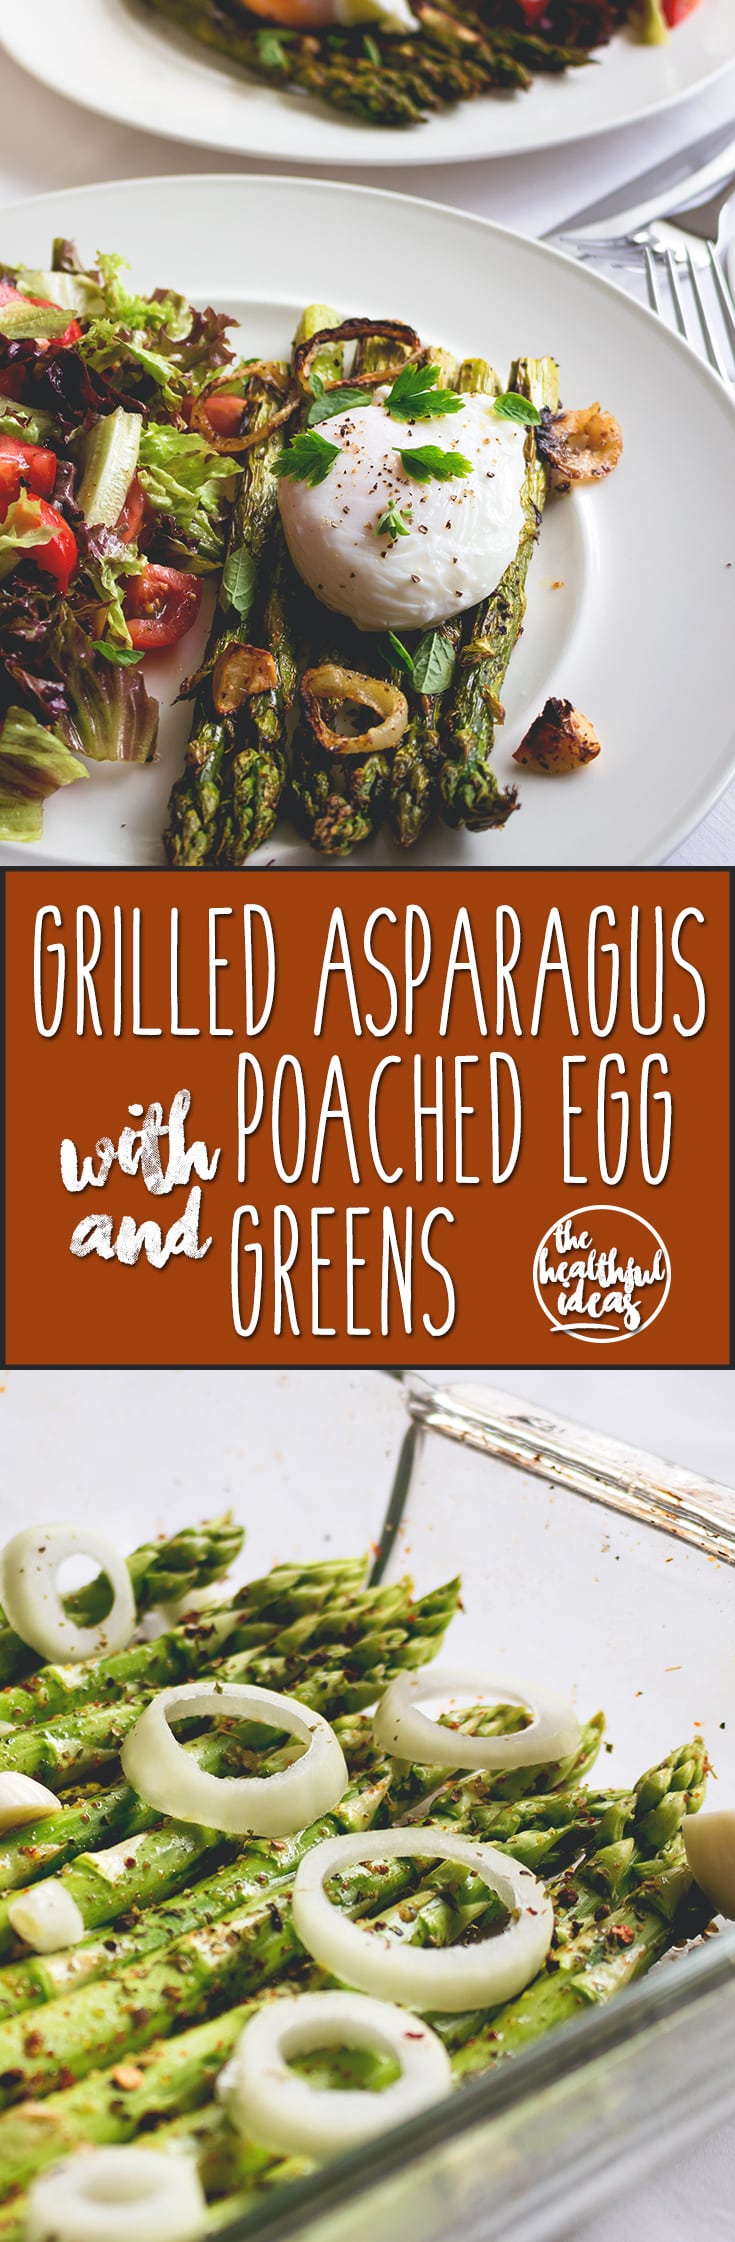 Grilled Asparagus with Poached Egg and Greens - delicious savory breakfast or bruch when you're craving something fancier. Healthy and actually really easy to make! We love this recipe! | thehealthfulideas.com